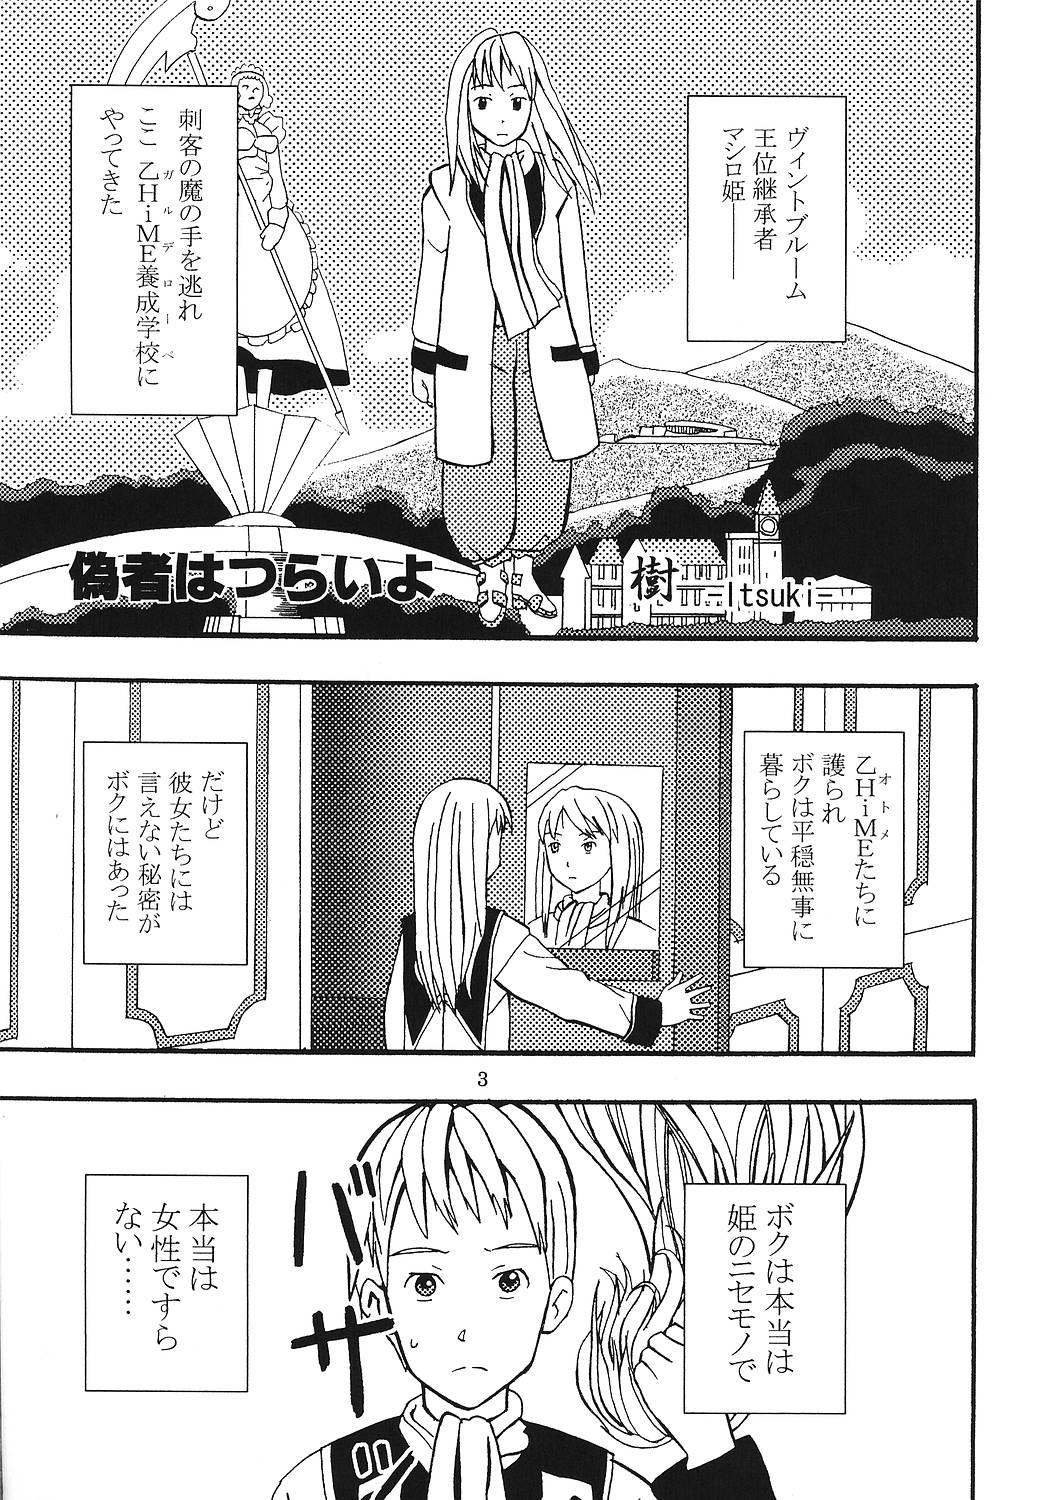 Movie SUPER COSMIC BREED 3 - Super robot wars Mai-hime Mai-otome Foot - Page 4